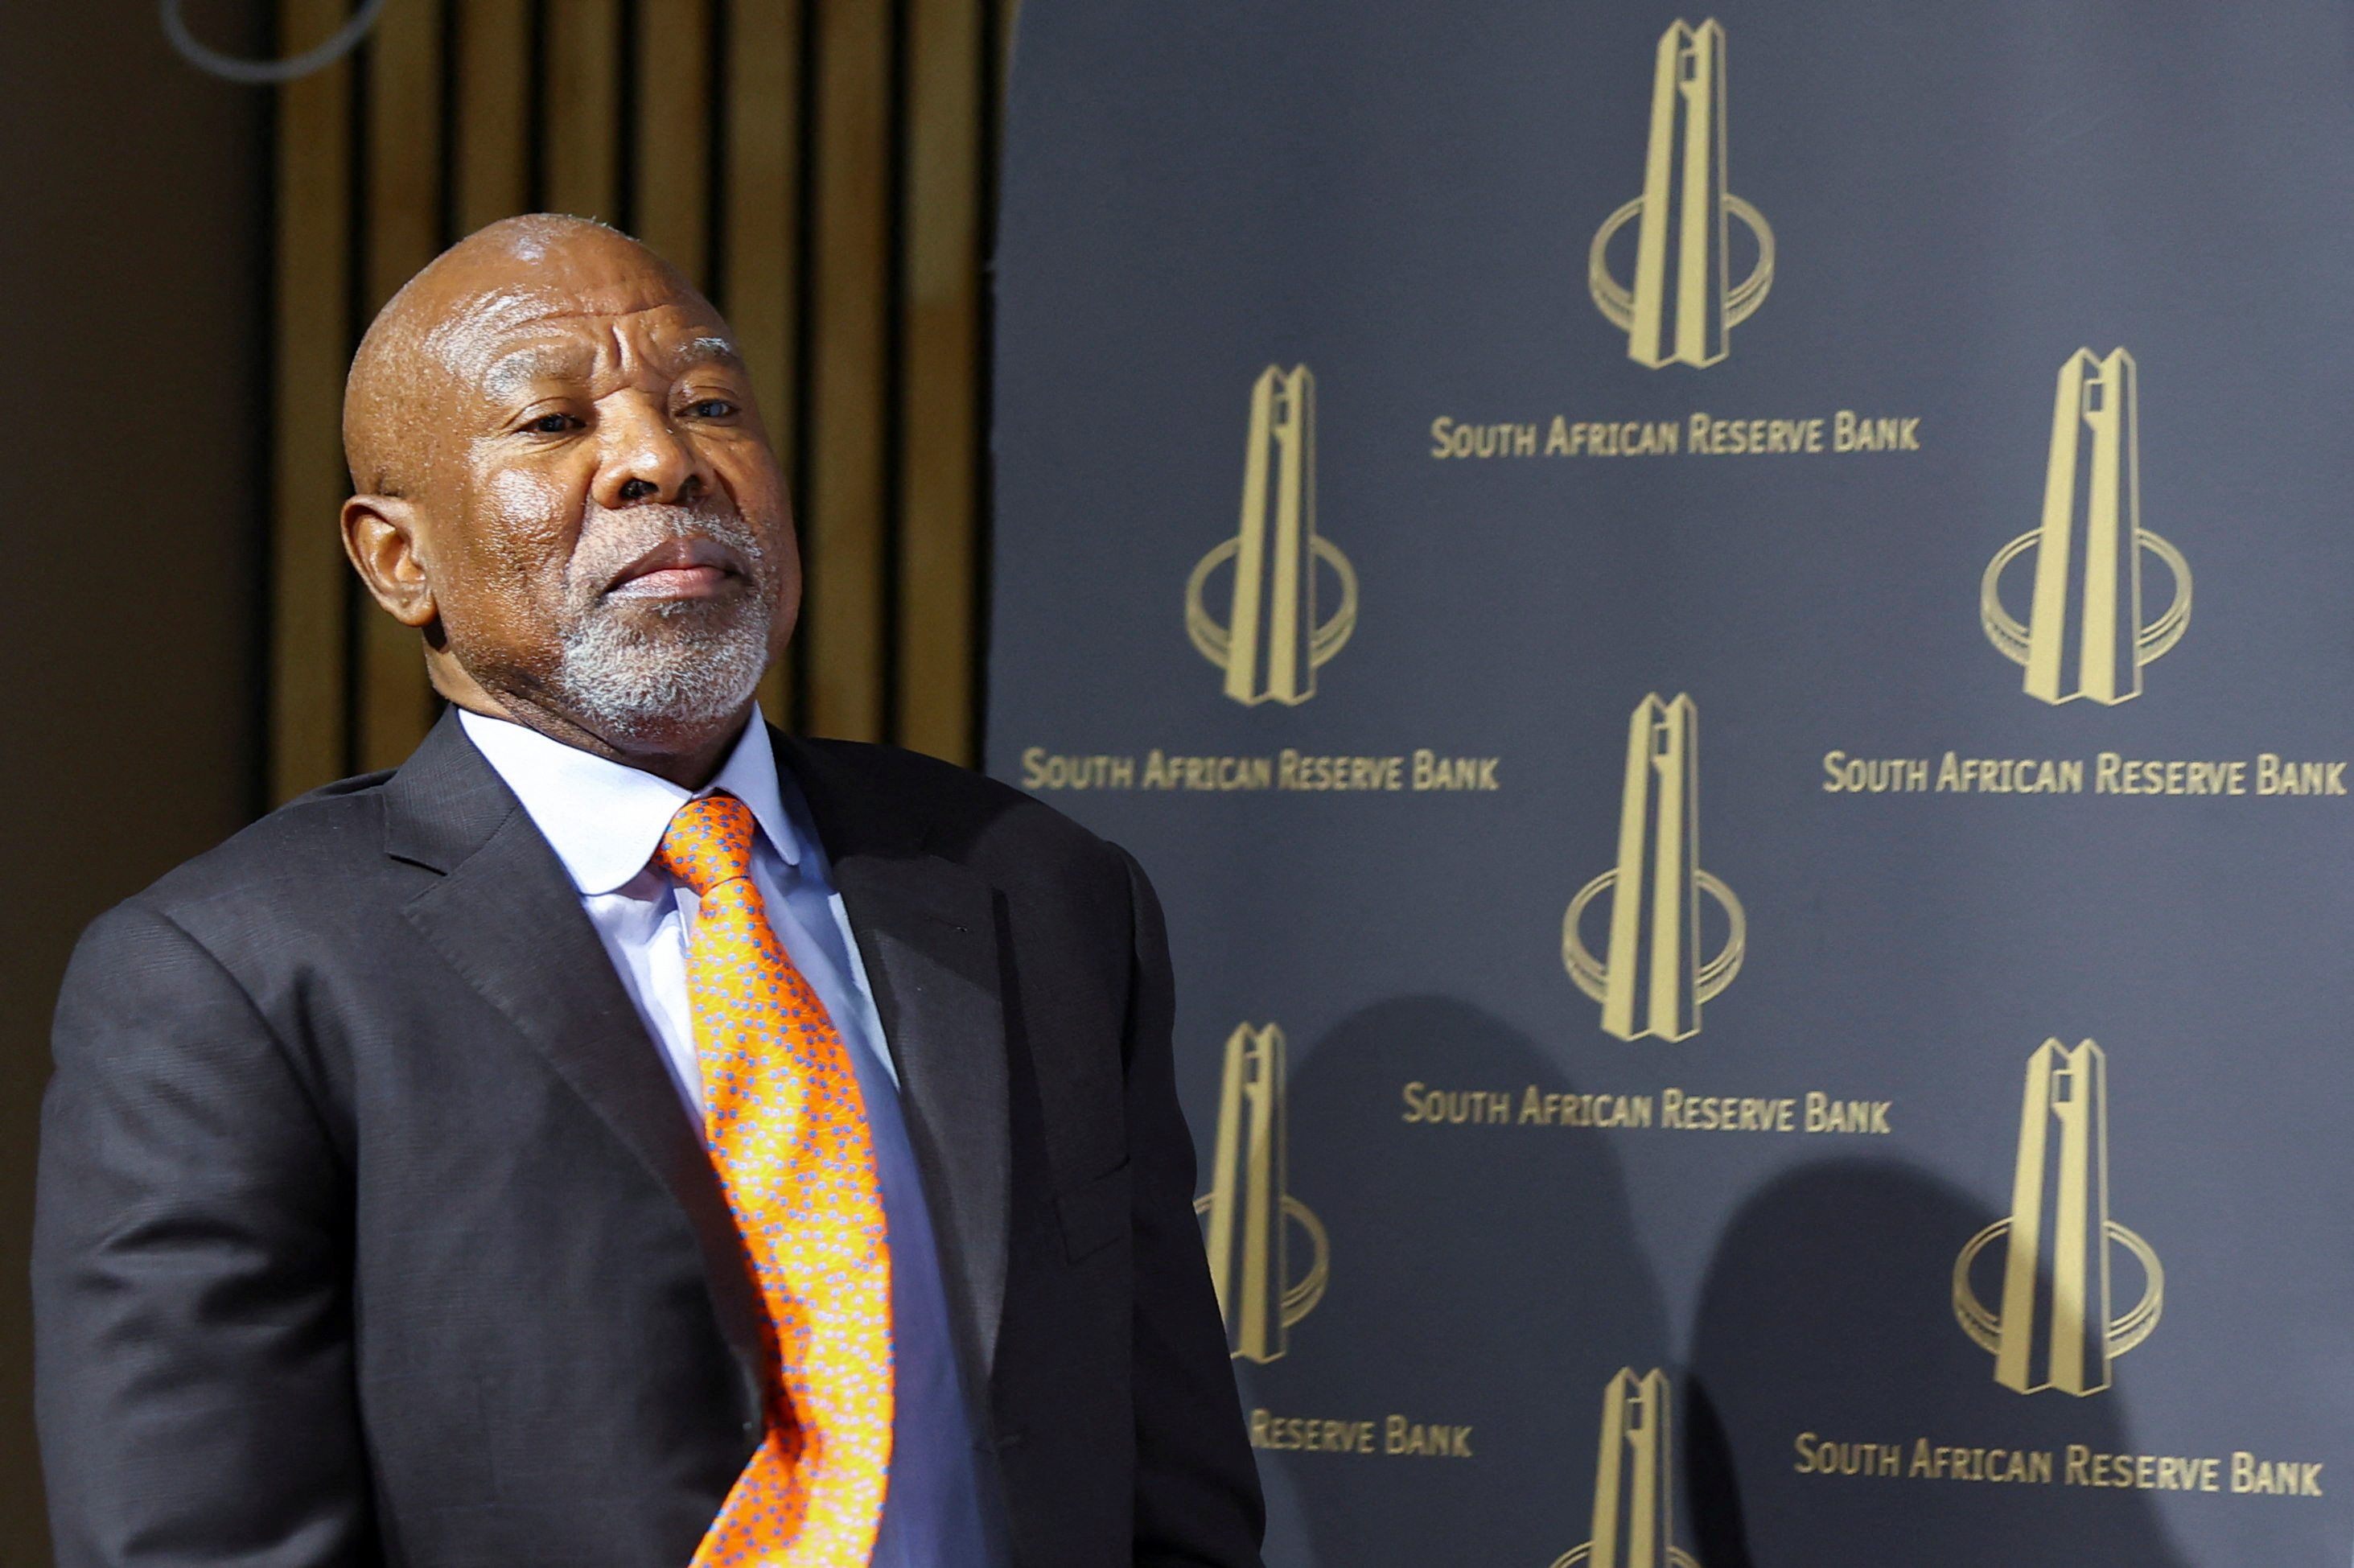 South Africa's central bank governor to delivers keynote address